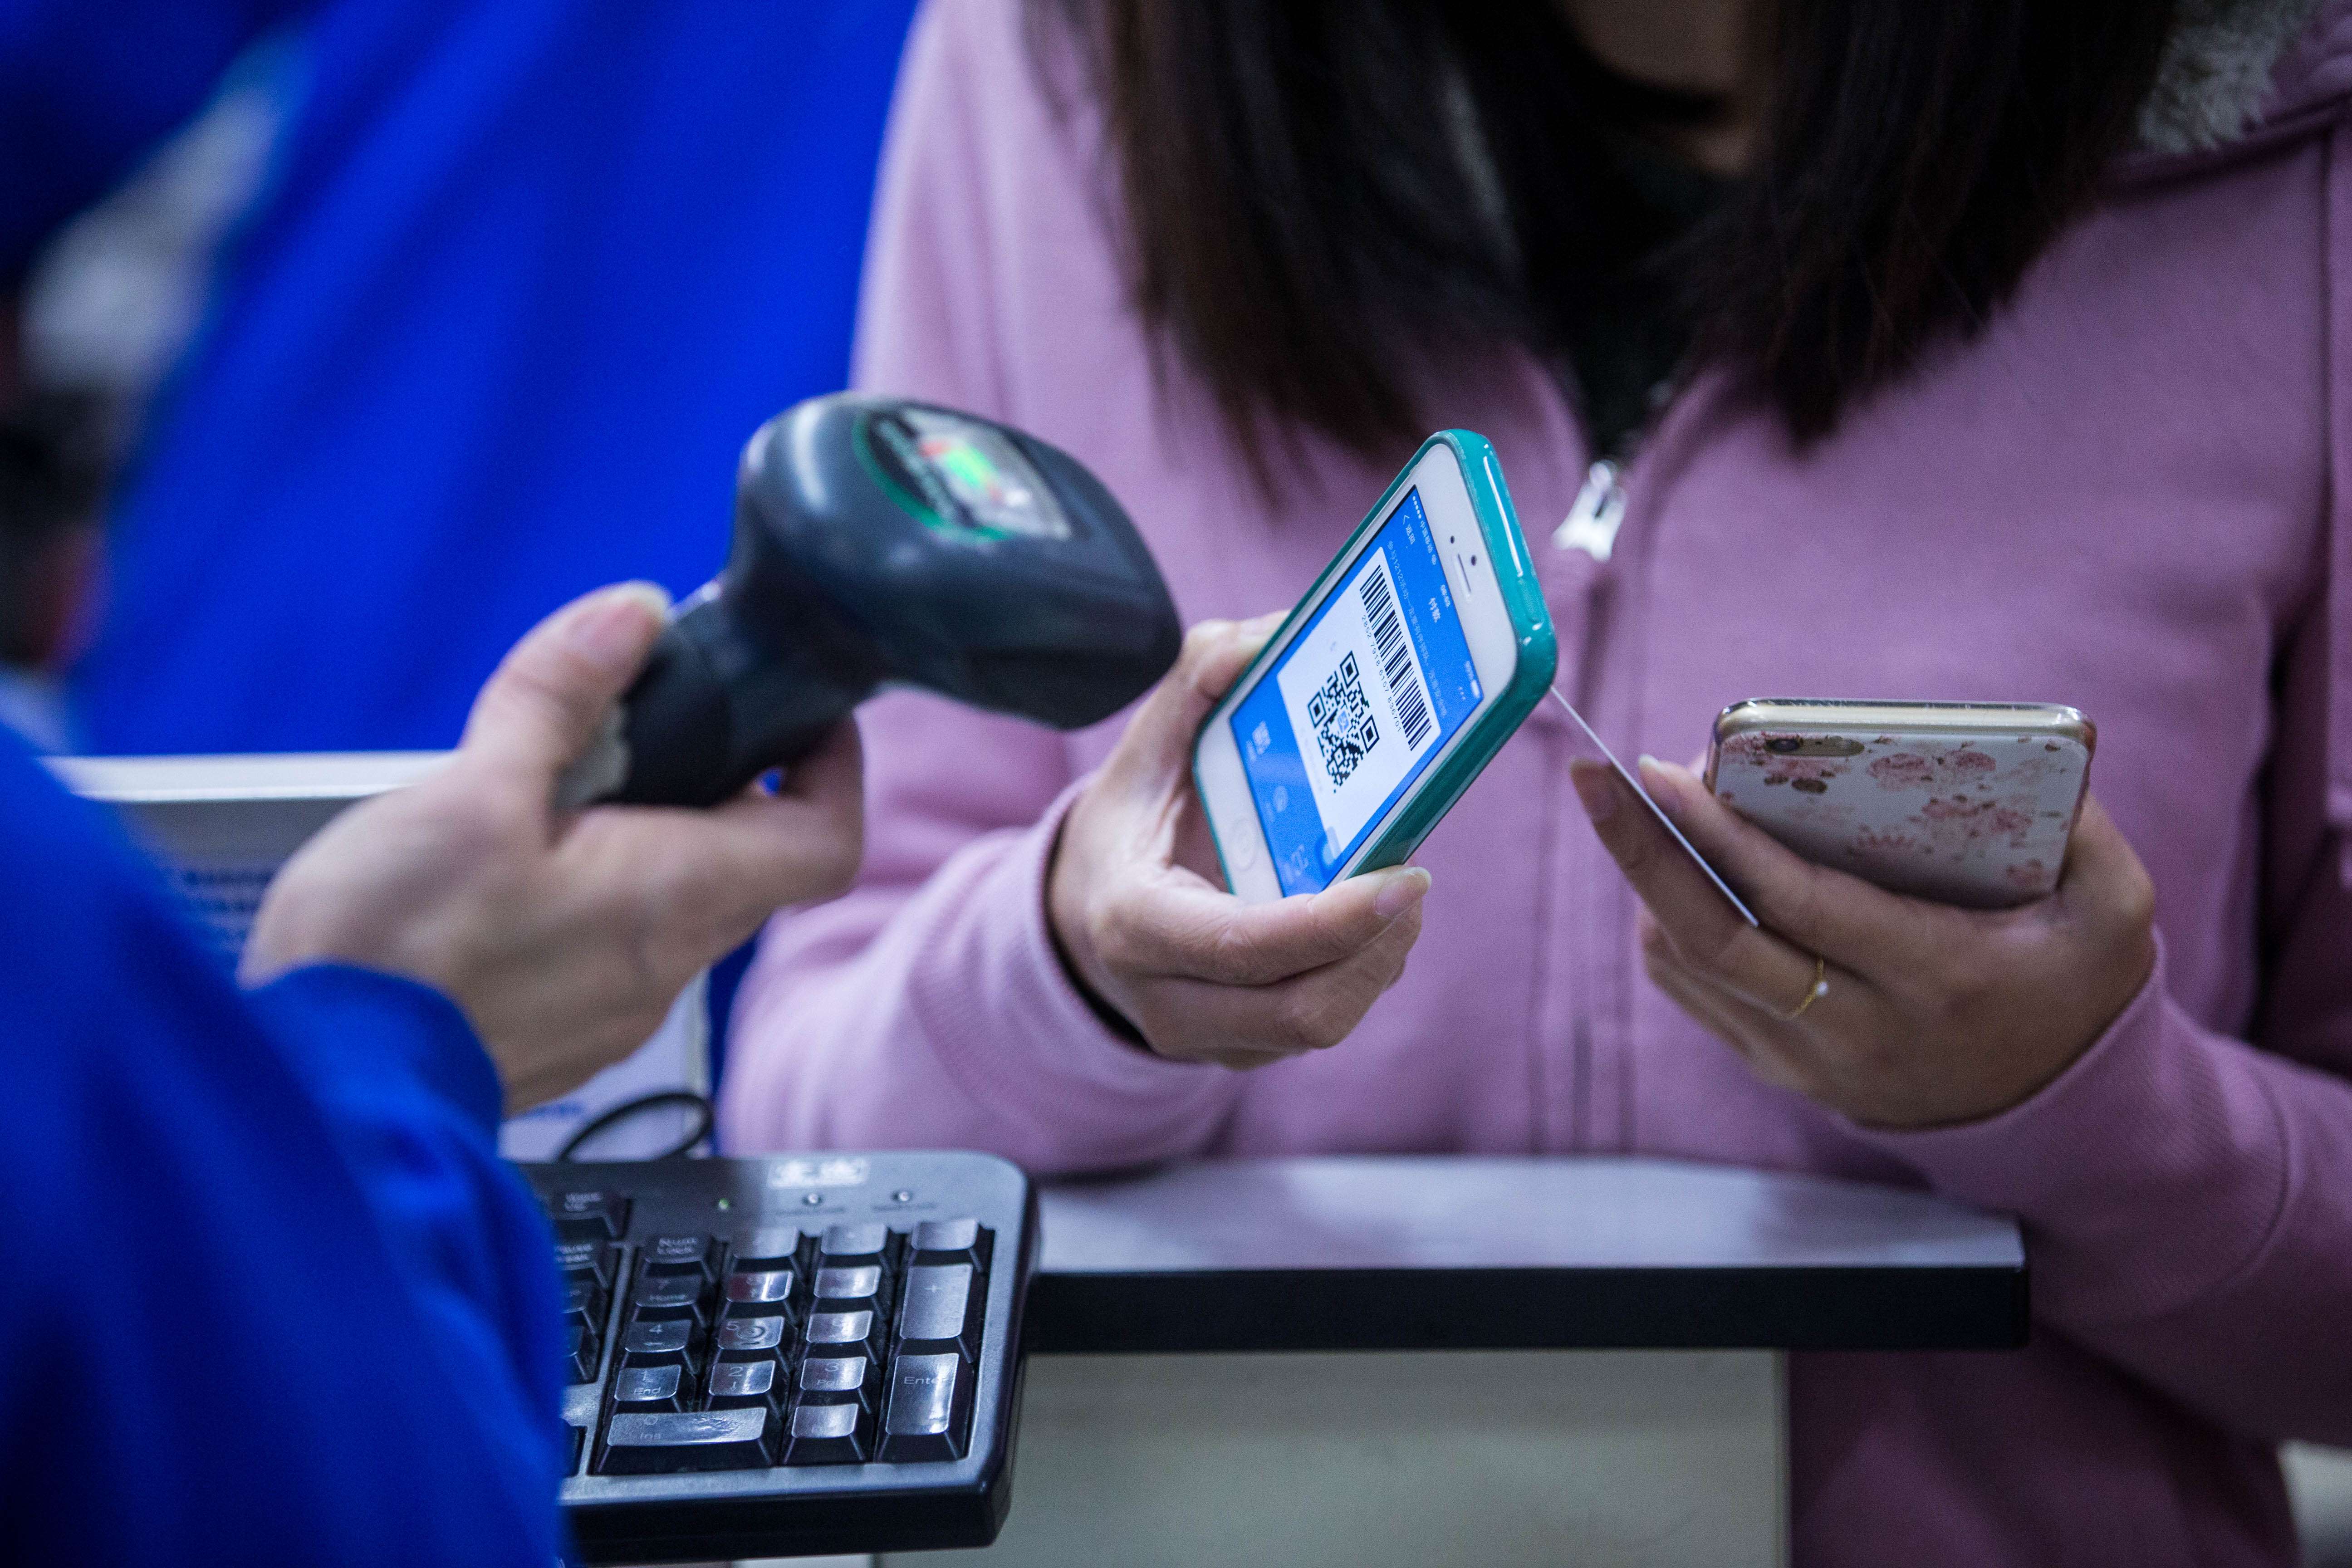 According to Network Information Centre, a state-backed agency, 469 million people in China used their smart devices to make payments in 2016, an increase of 31.2 per cent from a year ago. Photo: Imaginechina